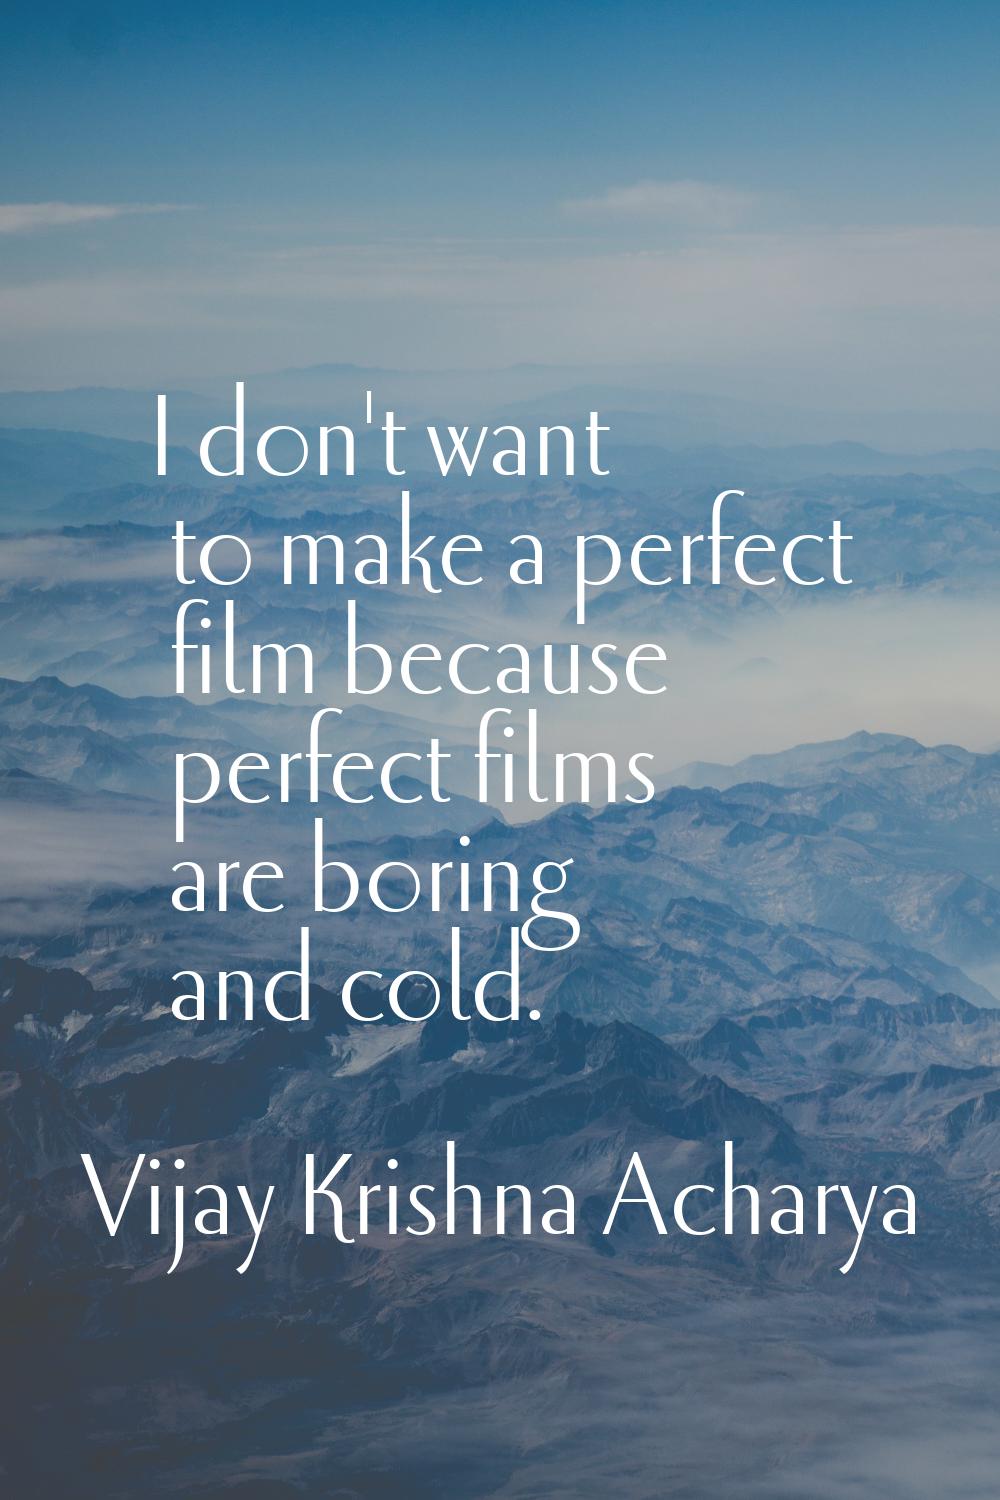 I don't want to make a perfect film because perfect films are boring and cold.